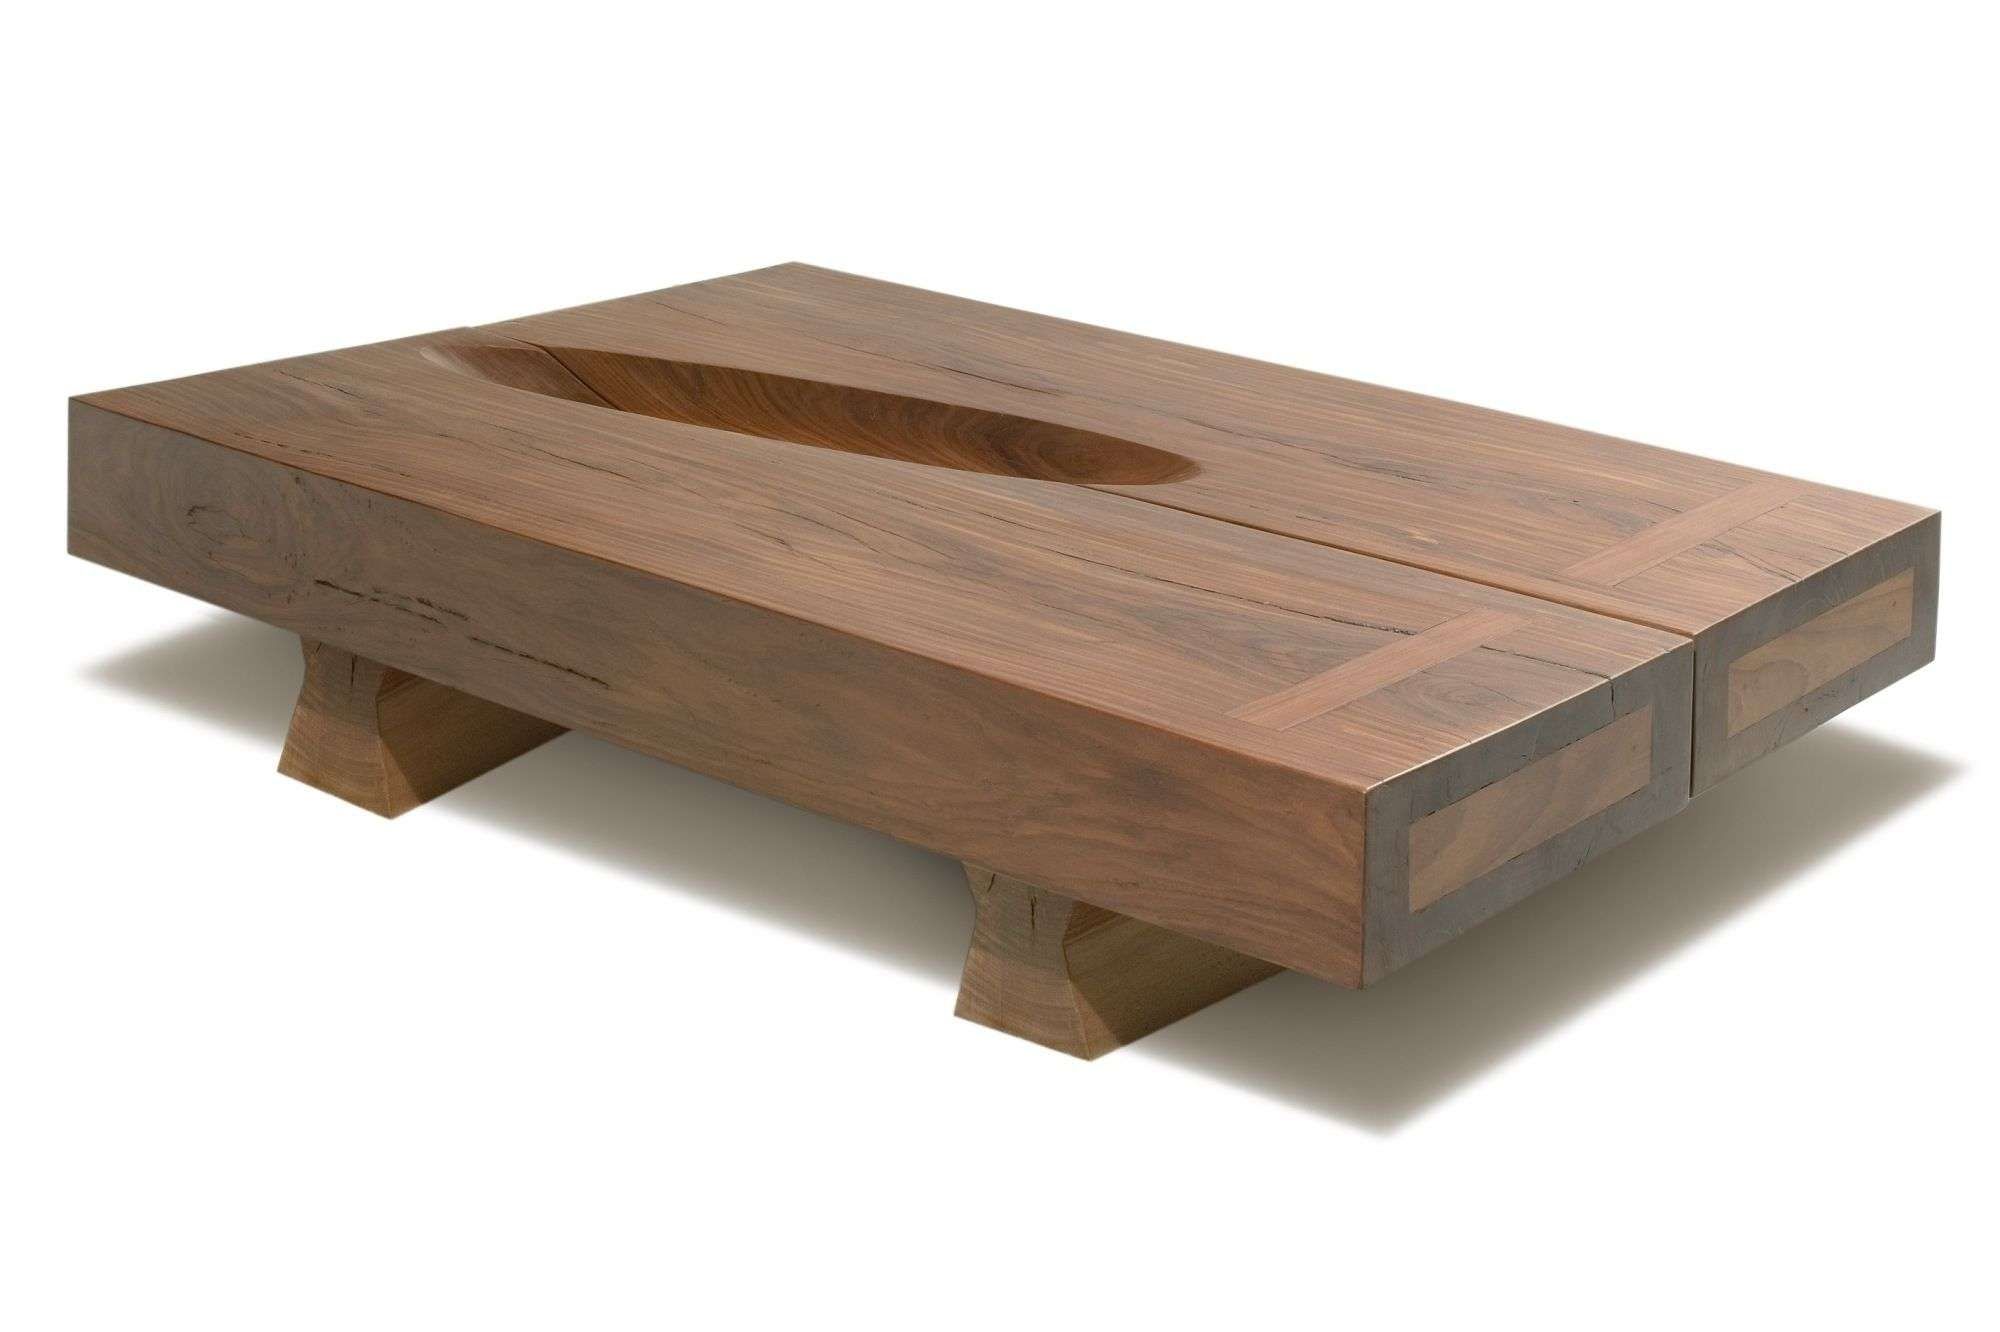 Most Recently Released Large Low Wooden Coffee Tables Inside Coffee Tables Ideas: Awesome Reclaimed Wood Coffee Tables For Sale (View 4 of 20)